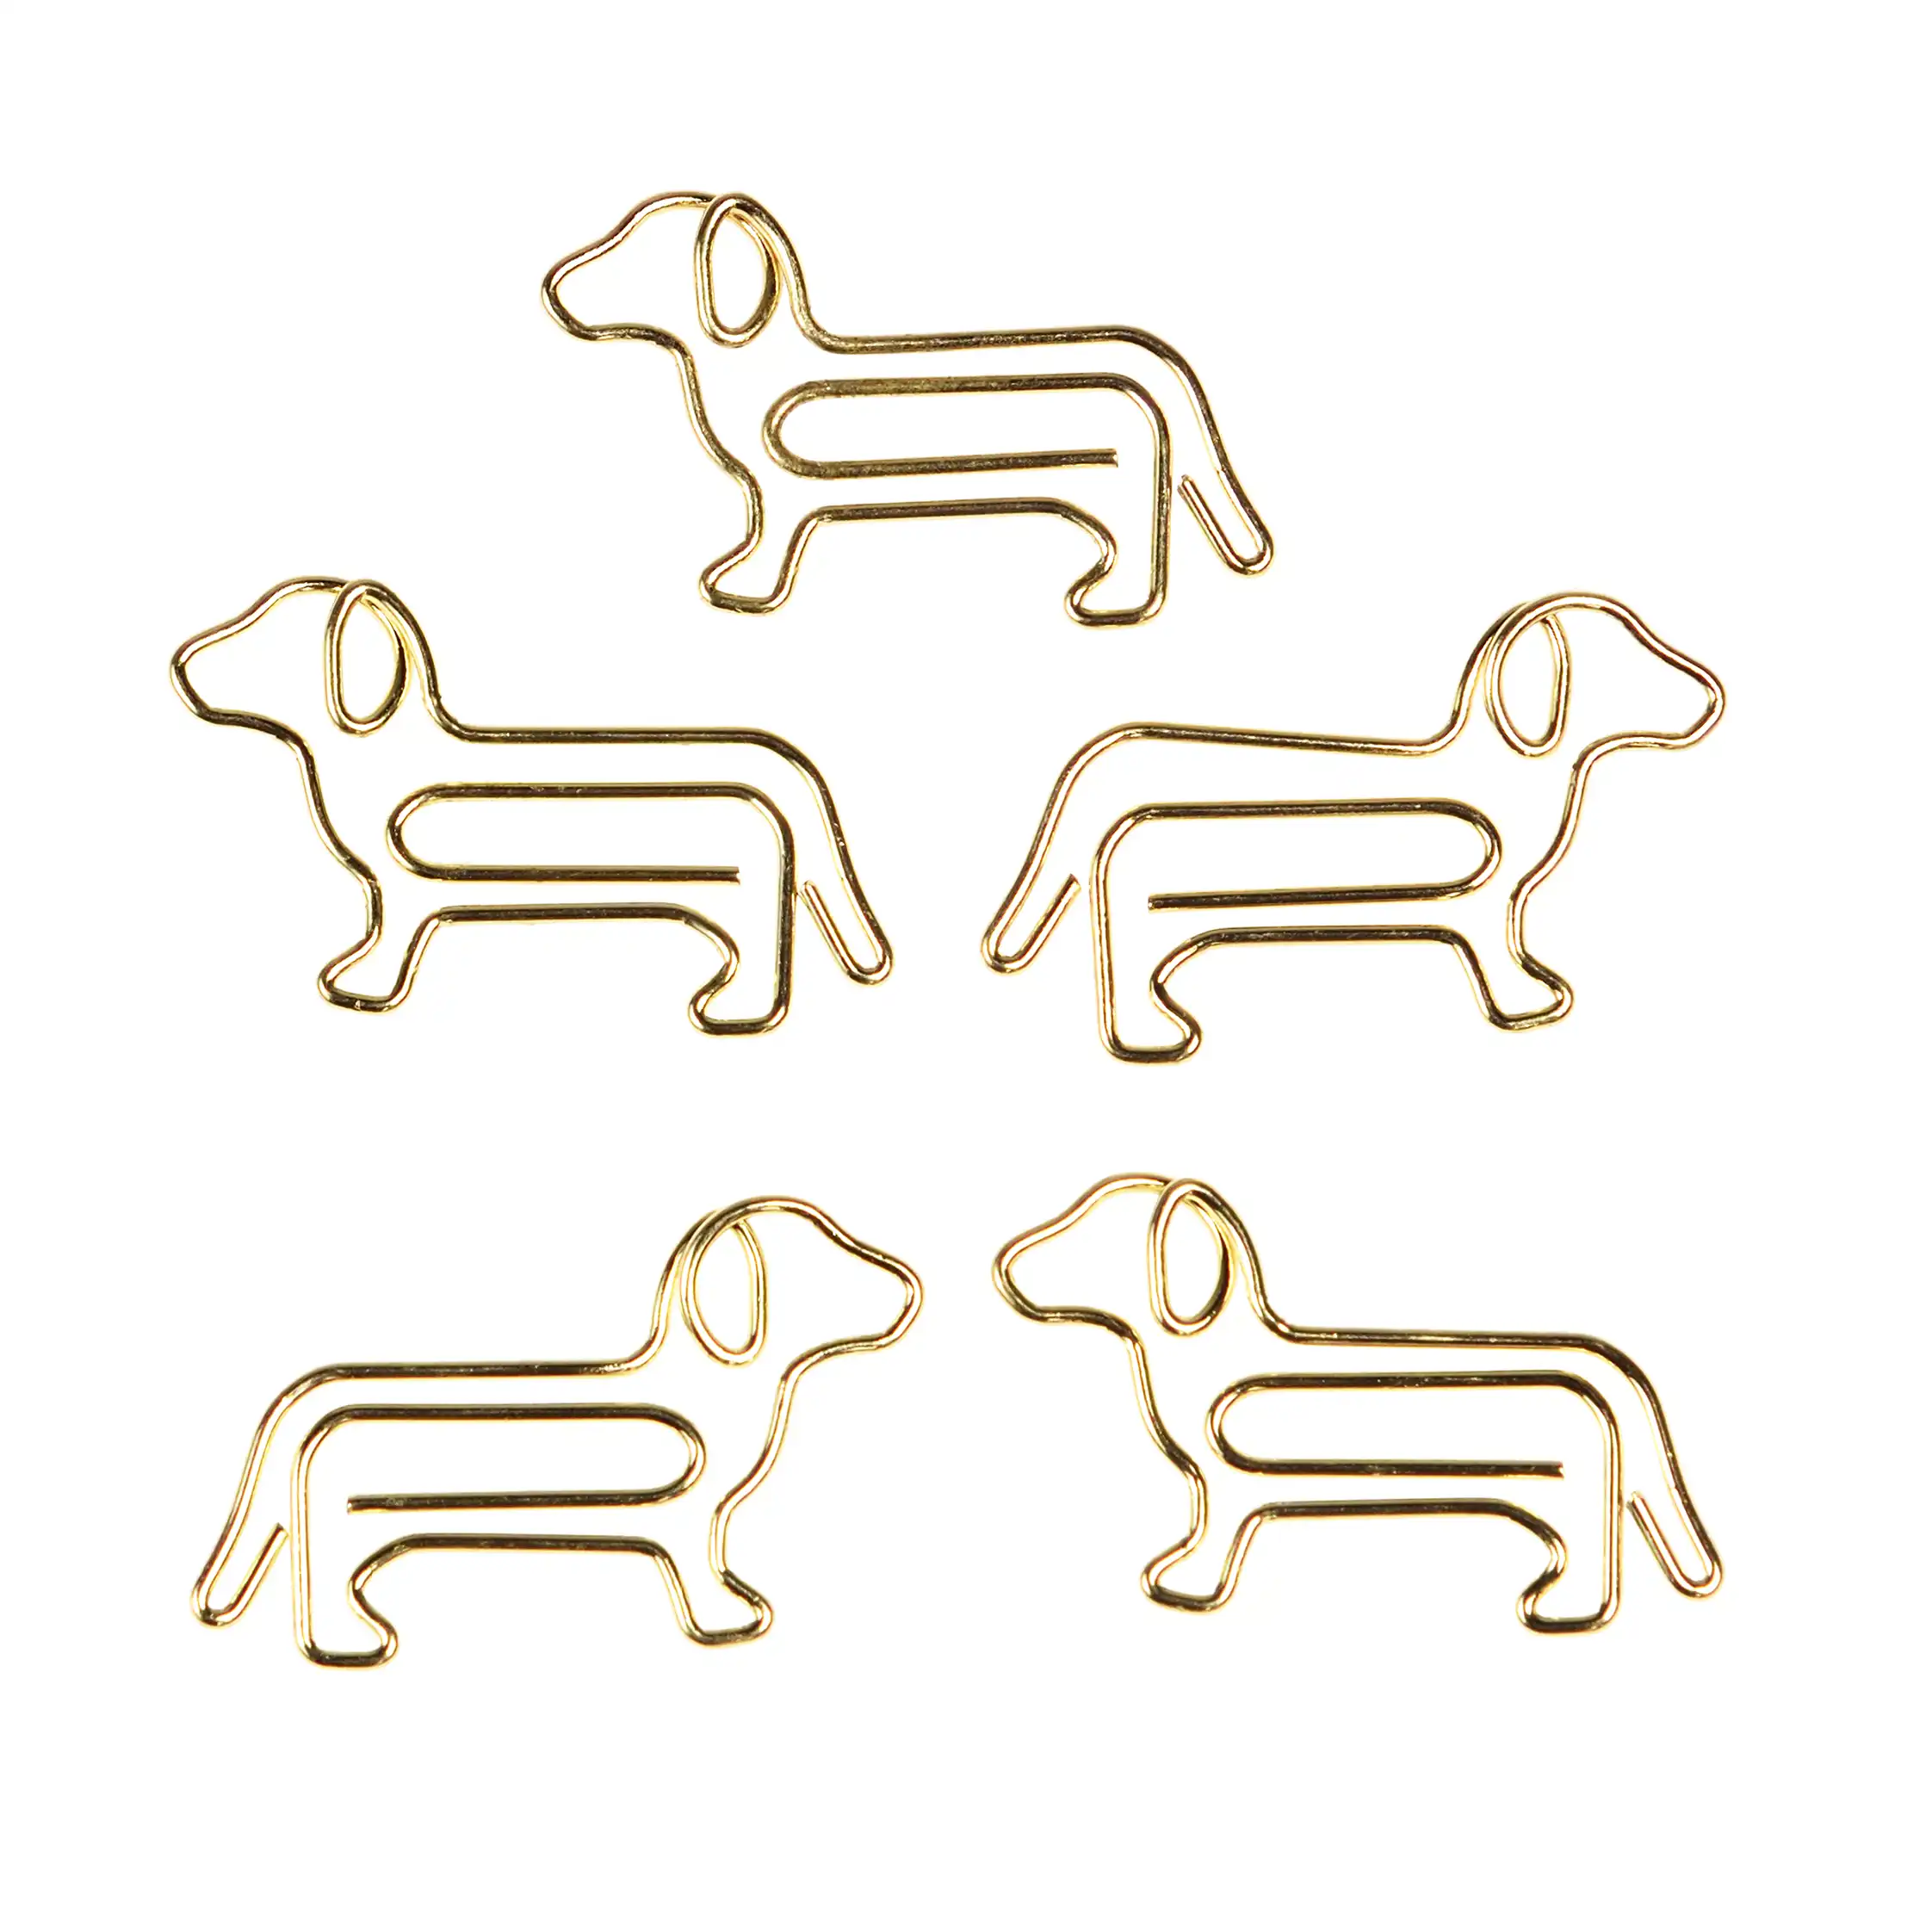 dog paper clips (set of 5) - best in show